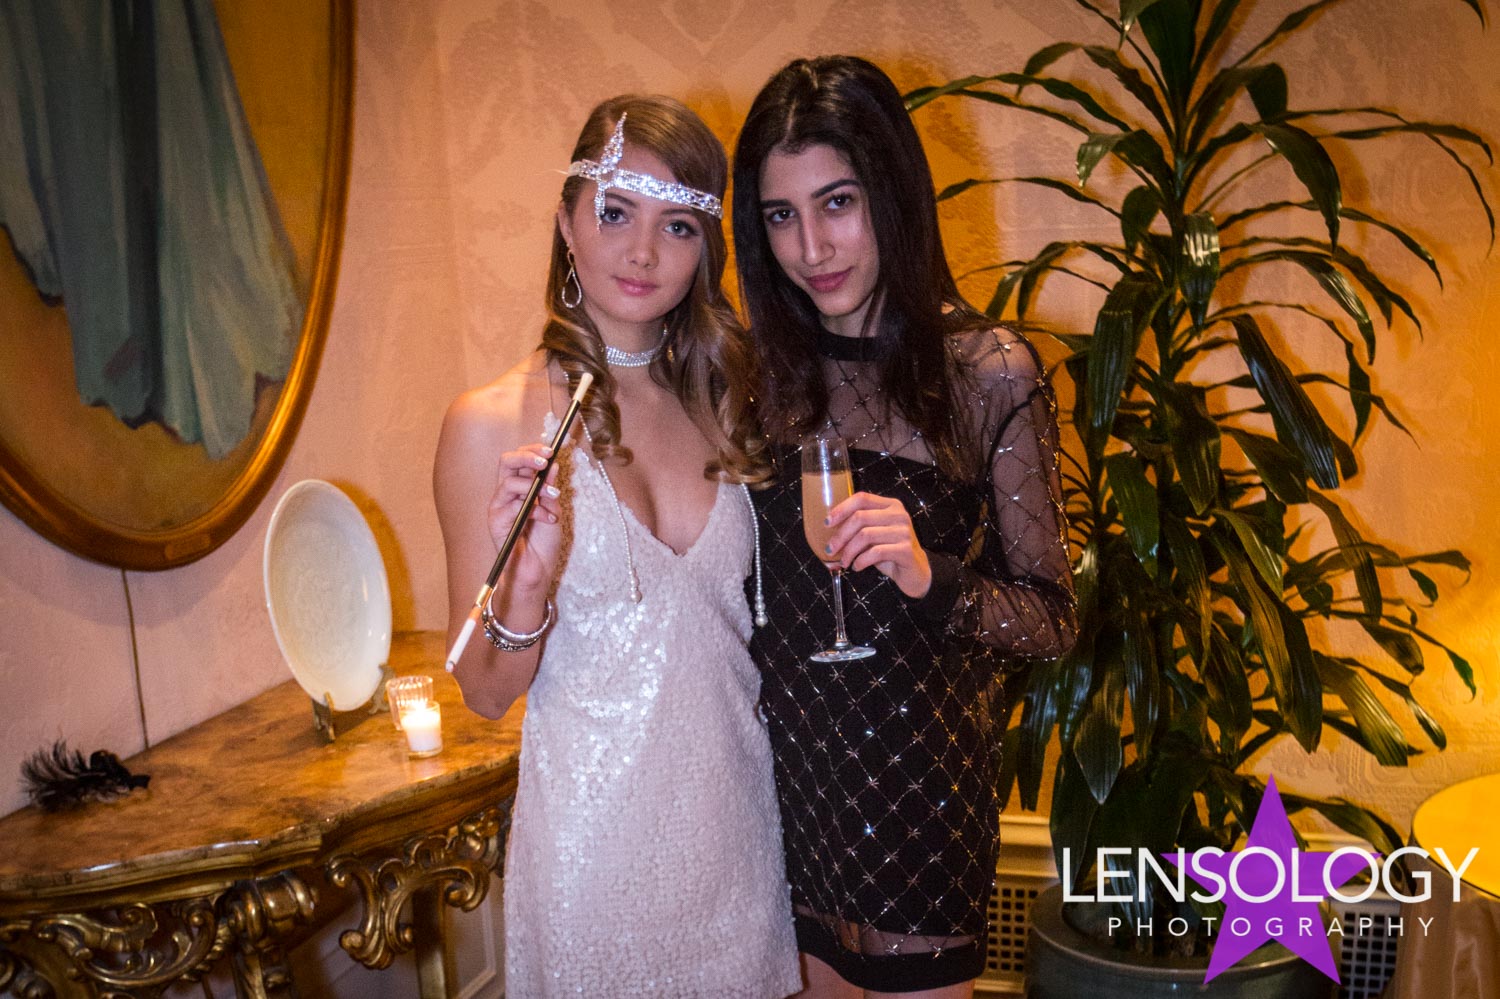 LENSOLOGY.NET - Casey F Gatsby themed birthday party at The California Club, LA, CA..
All images are copyright of Lensology.net
Email: info@lensology.net
www.lensology.net